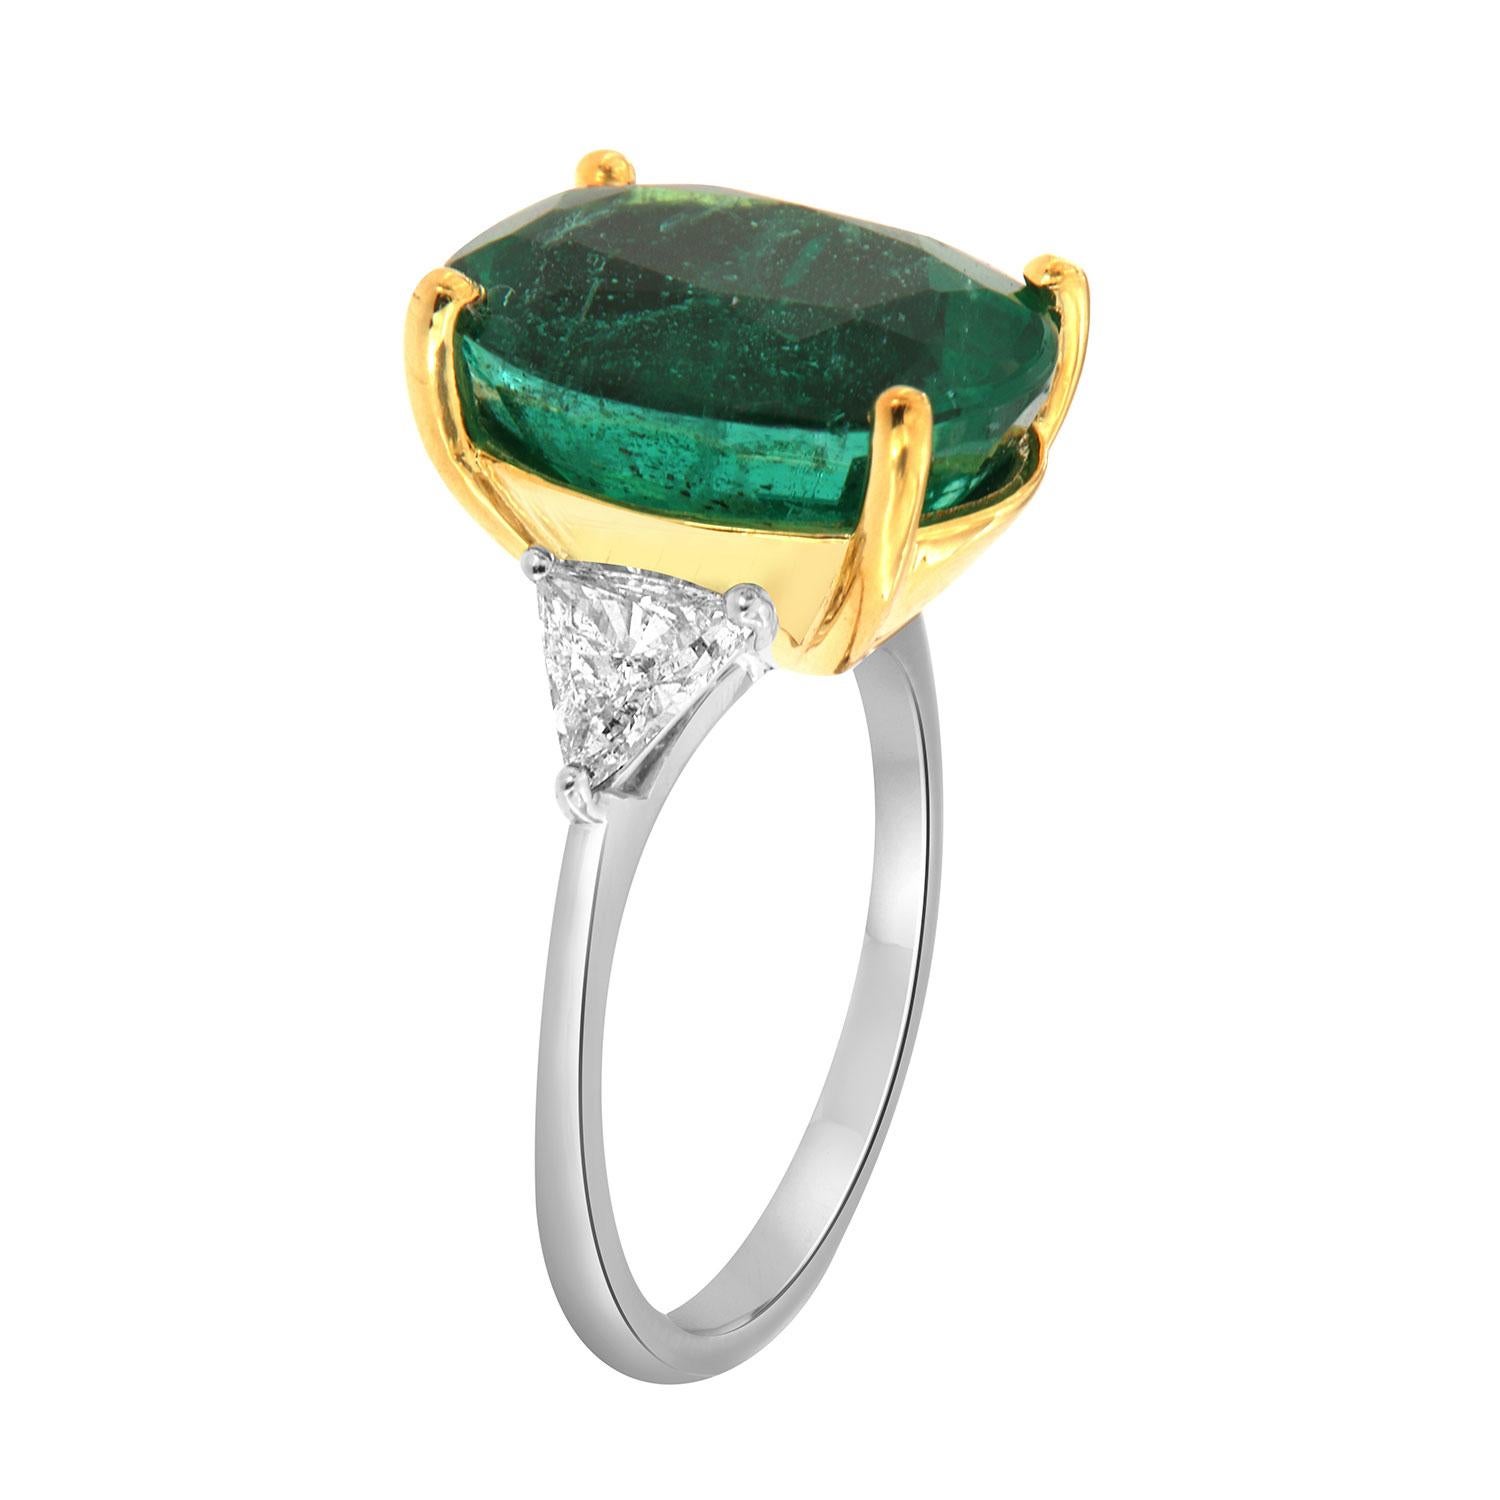 This classic Platinum and 18k Yellow Gold ring features a 7.89 Carat Oval-shaped Vibrant Bright green Natural Emerald flanked by two(2) Triangle-shaped diamonds in a total weight of 0.82 Carat on a 1.8 mm wide band. 
This Zambian Emerald exhibits a